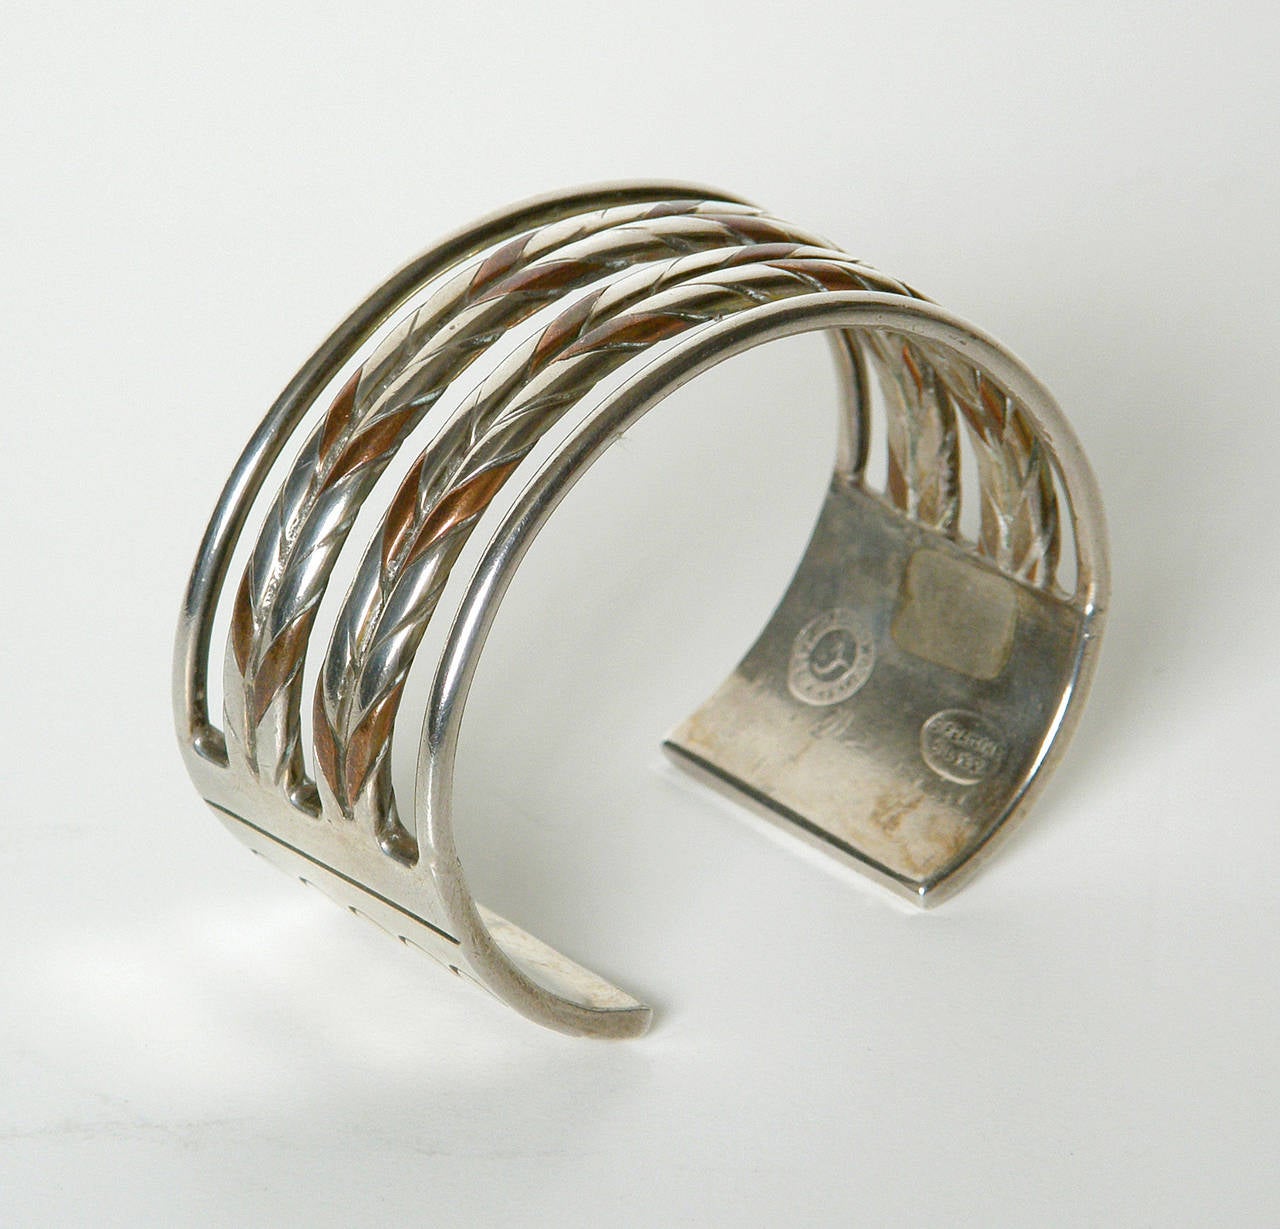 This handsome William Spratling bracelet has two braided or twisted bands made up of thick sterling and copper stock flanked by two plain sterling bands. They terminate at rectangular sterling sections with incised lines and circles. It has a nice